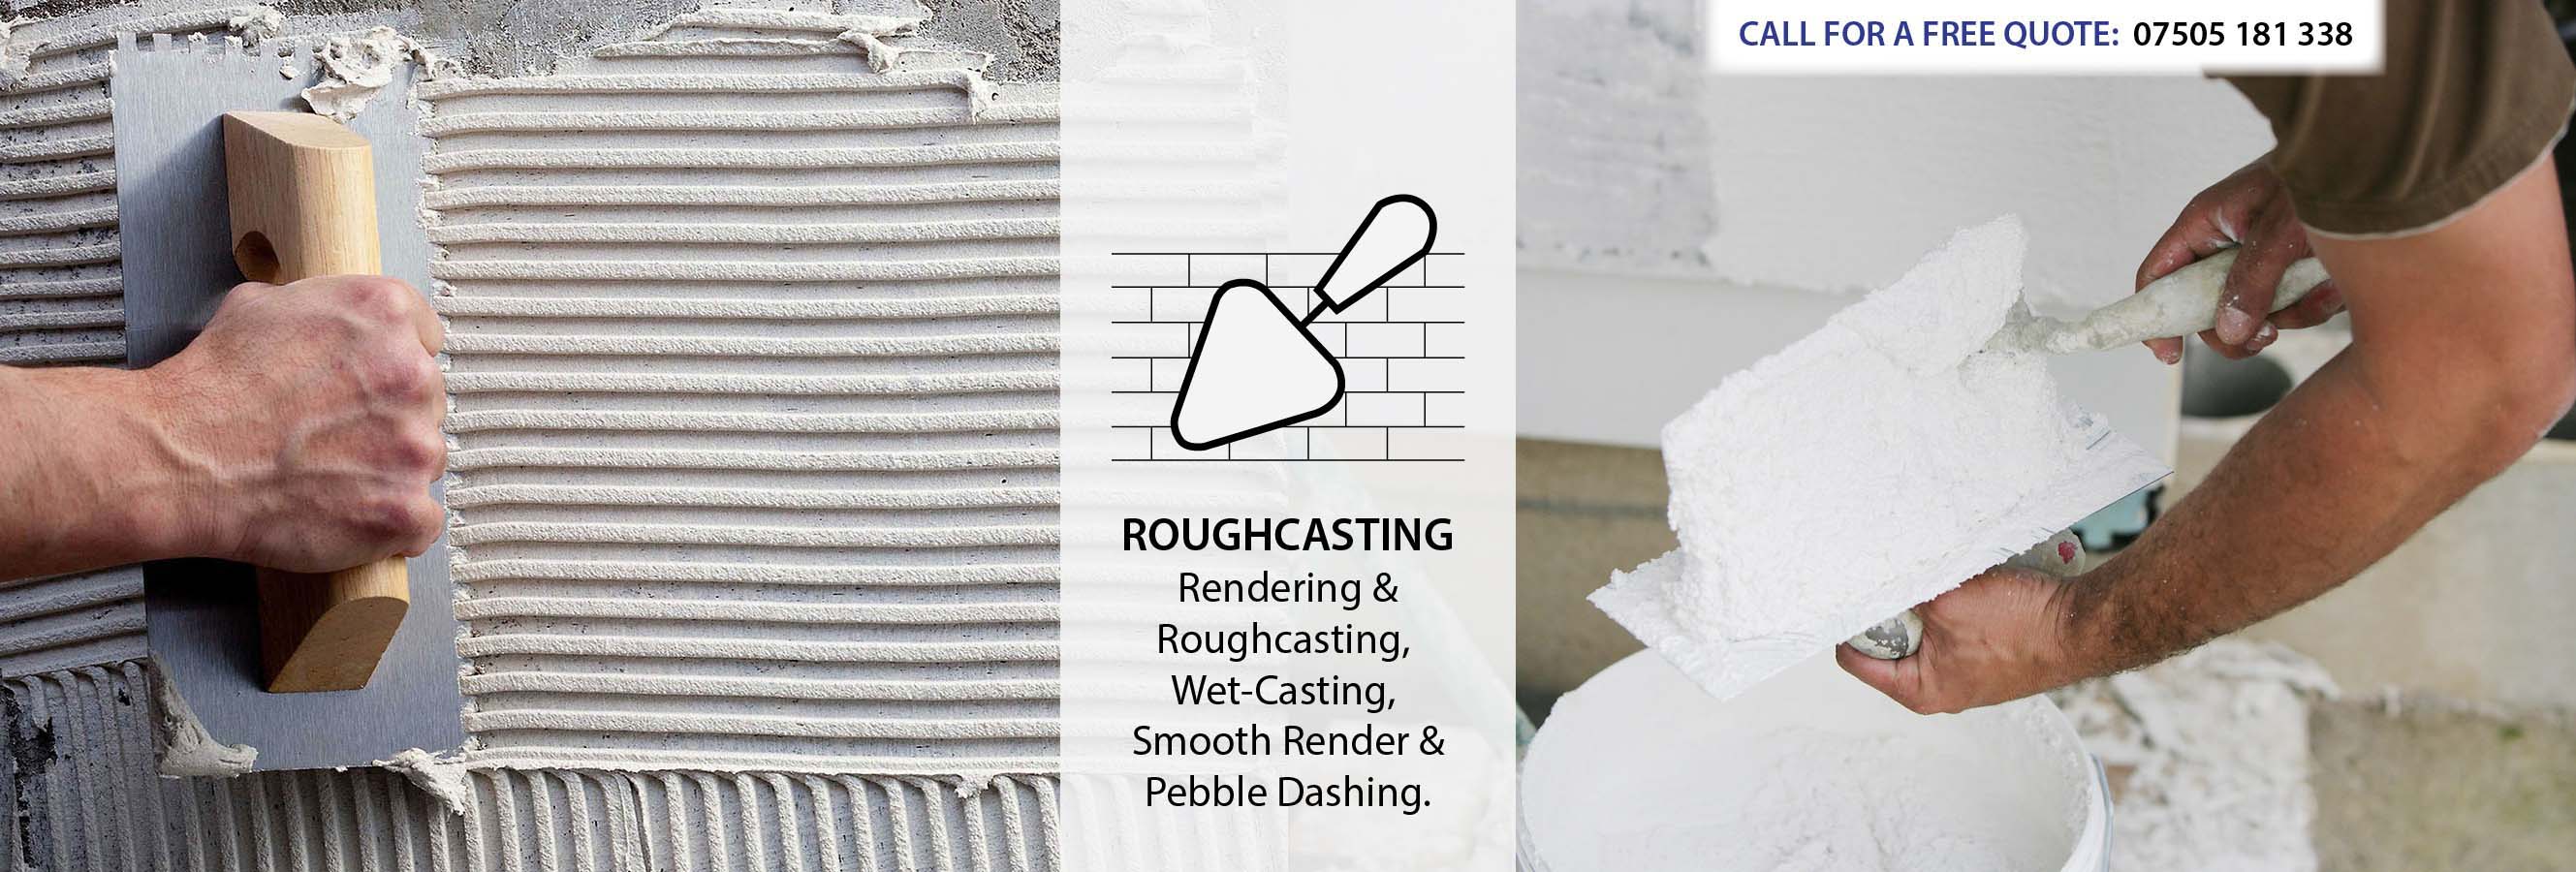 All Types of Rendering & Roughcasting